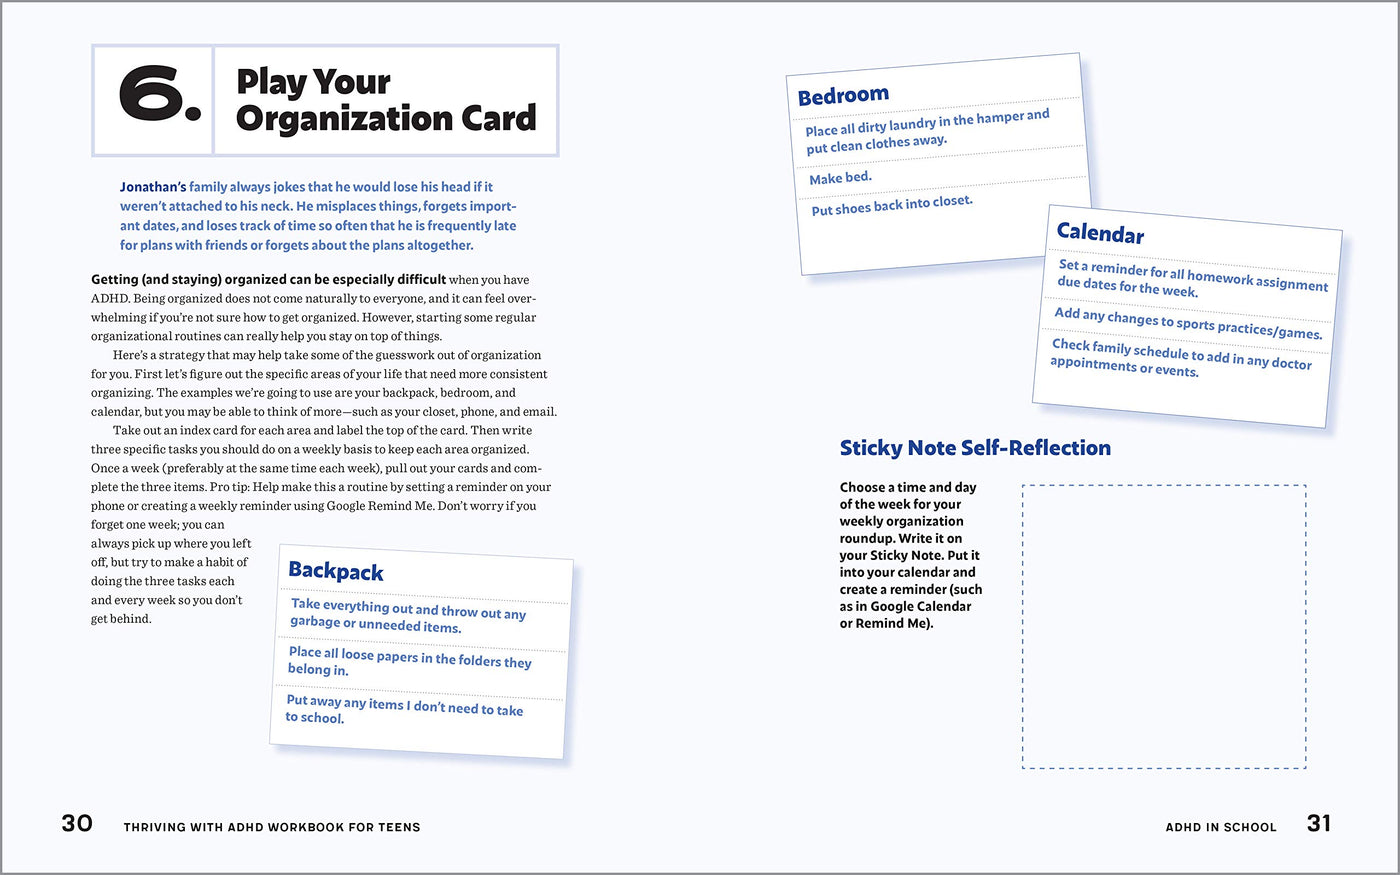 Inside of Thriving with ADHD (Play Your Organization Card)